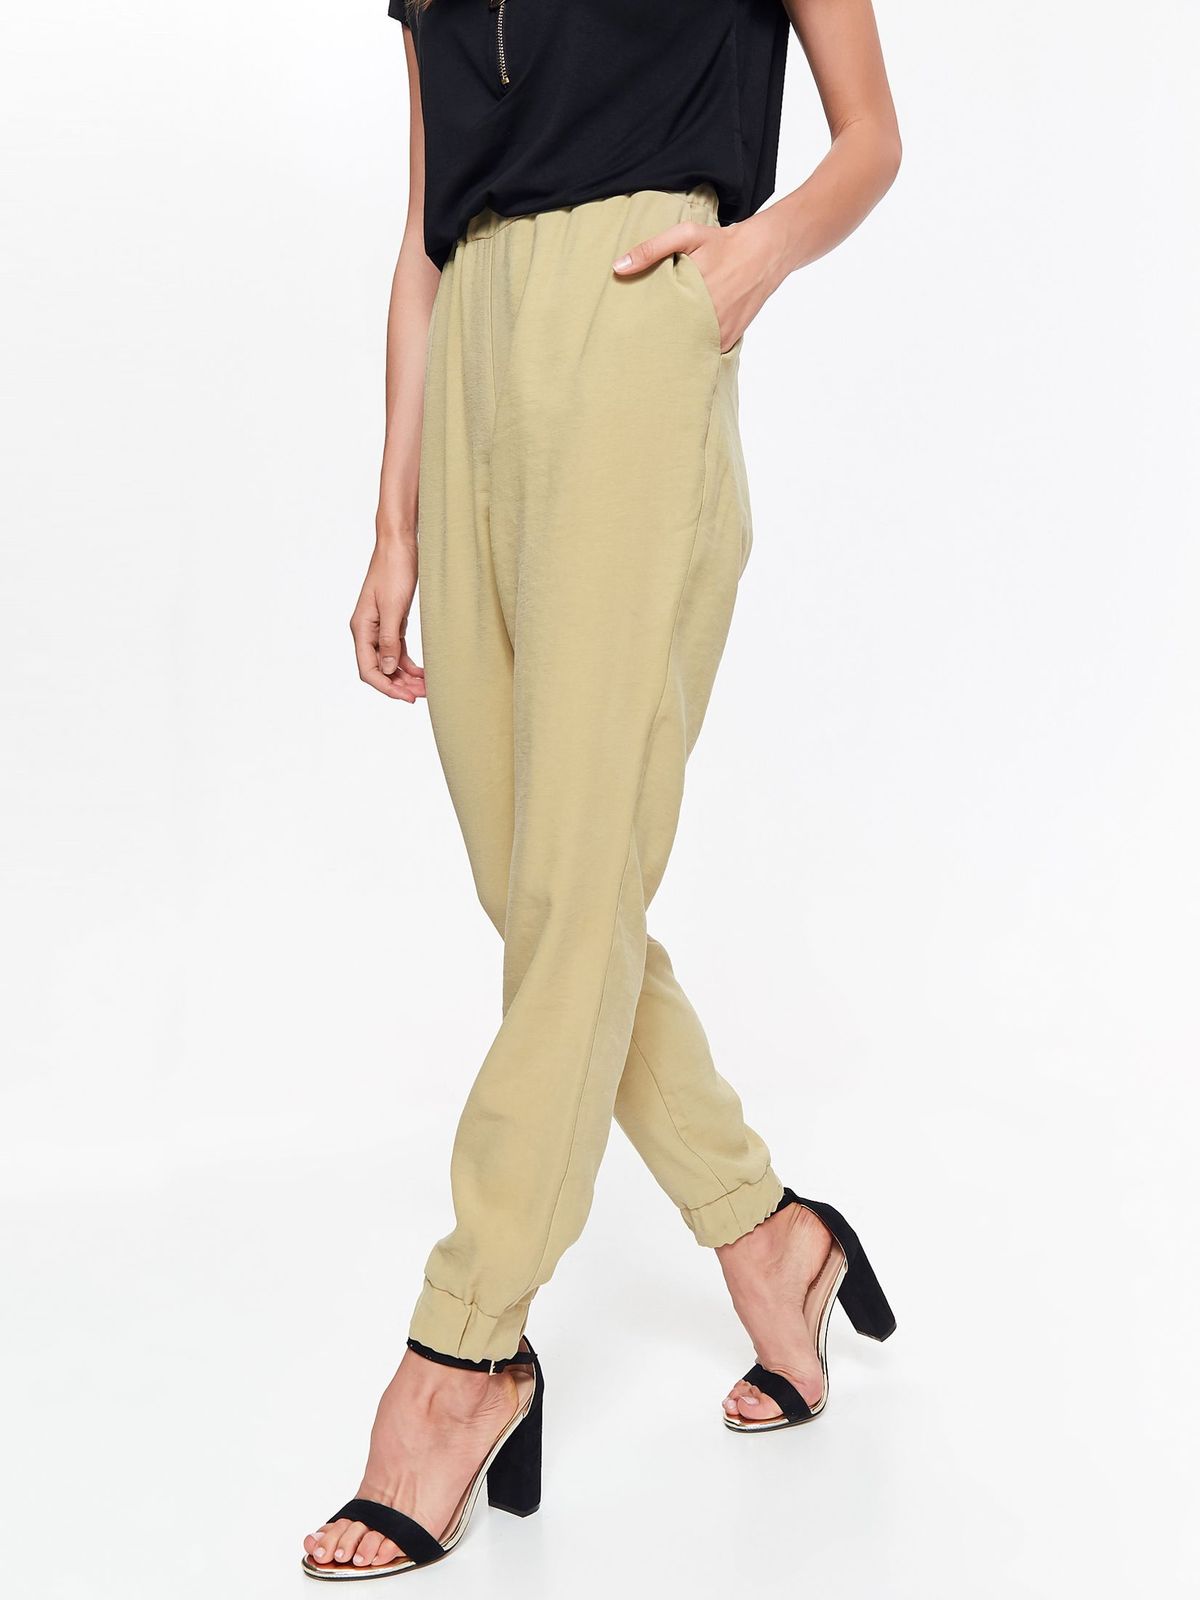 Top Secret cream trousers casual with pockets thin fabric with elastic ...